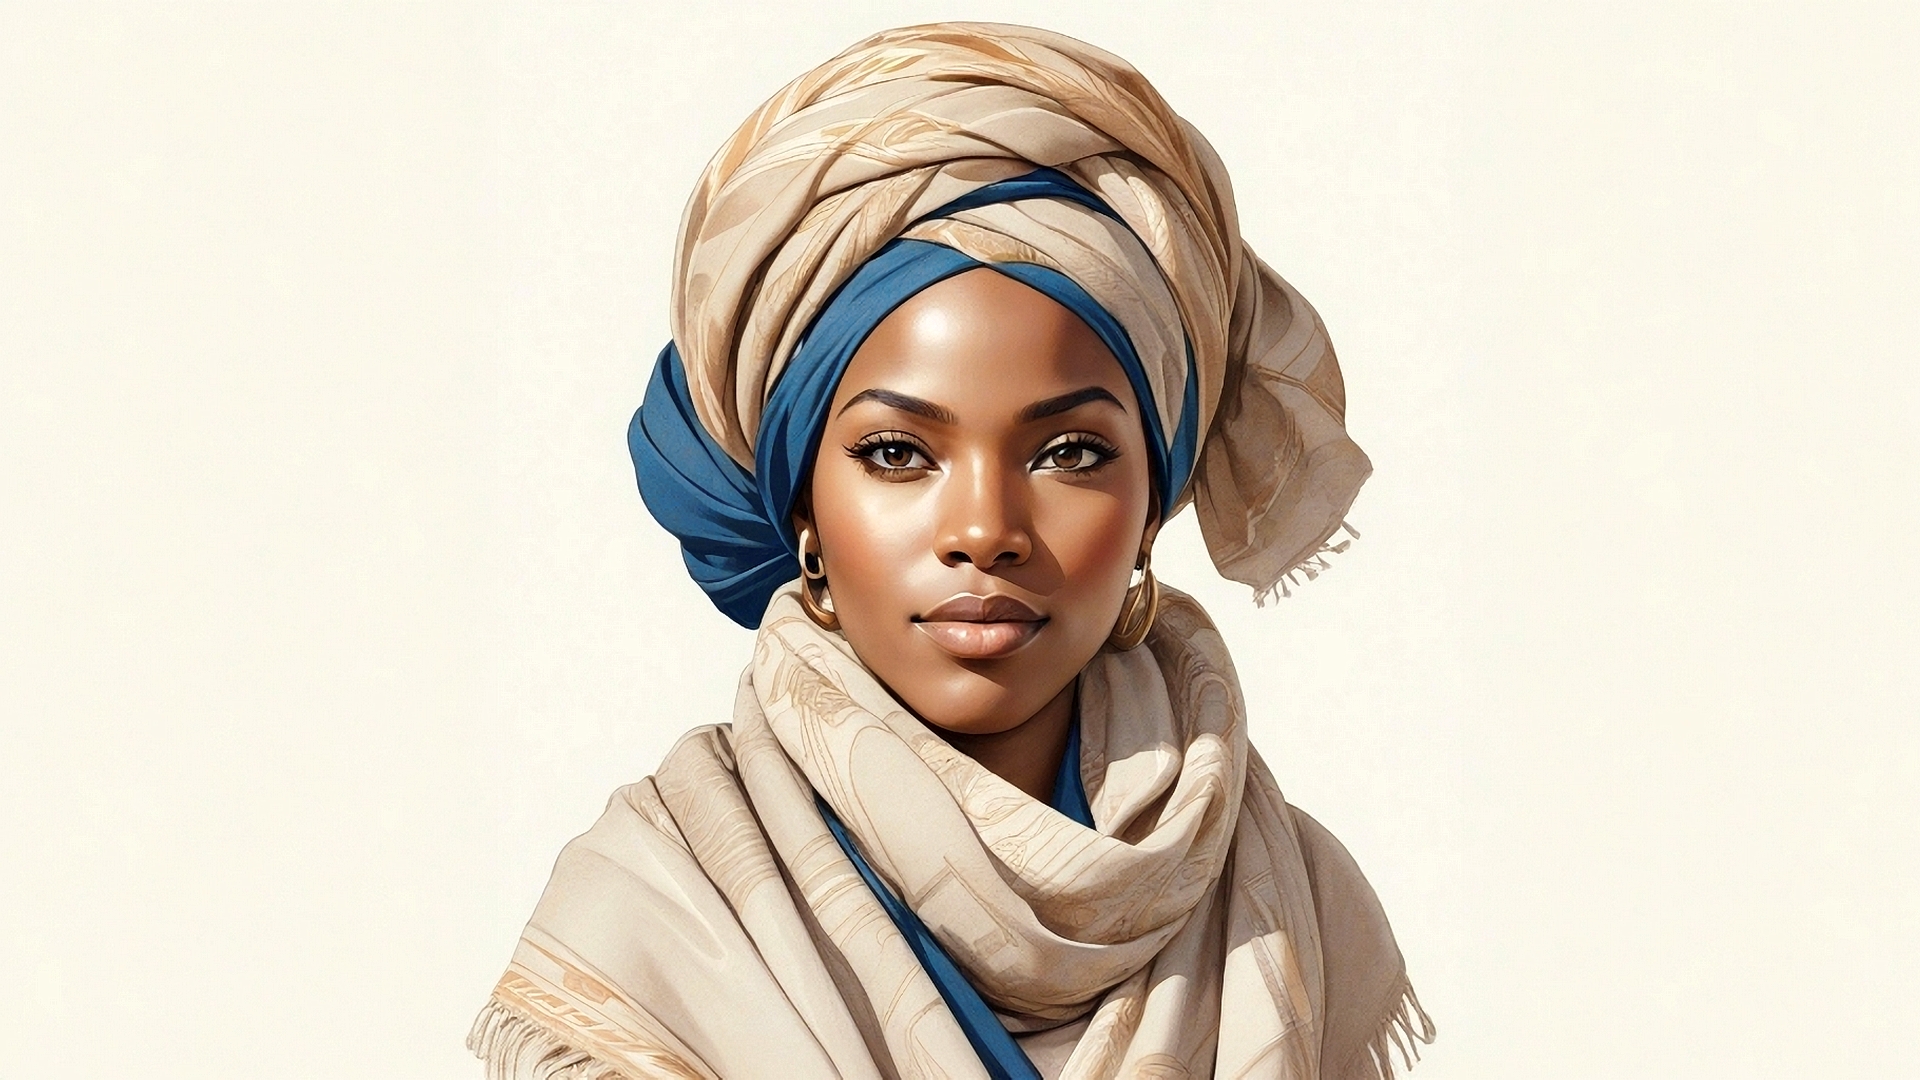 Portrait of a black girl in a turban on a light background